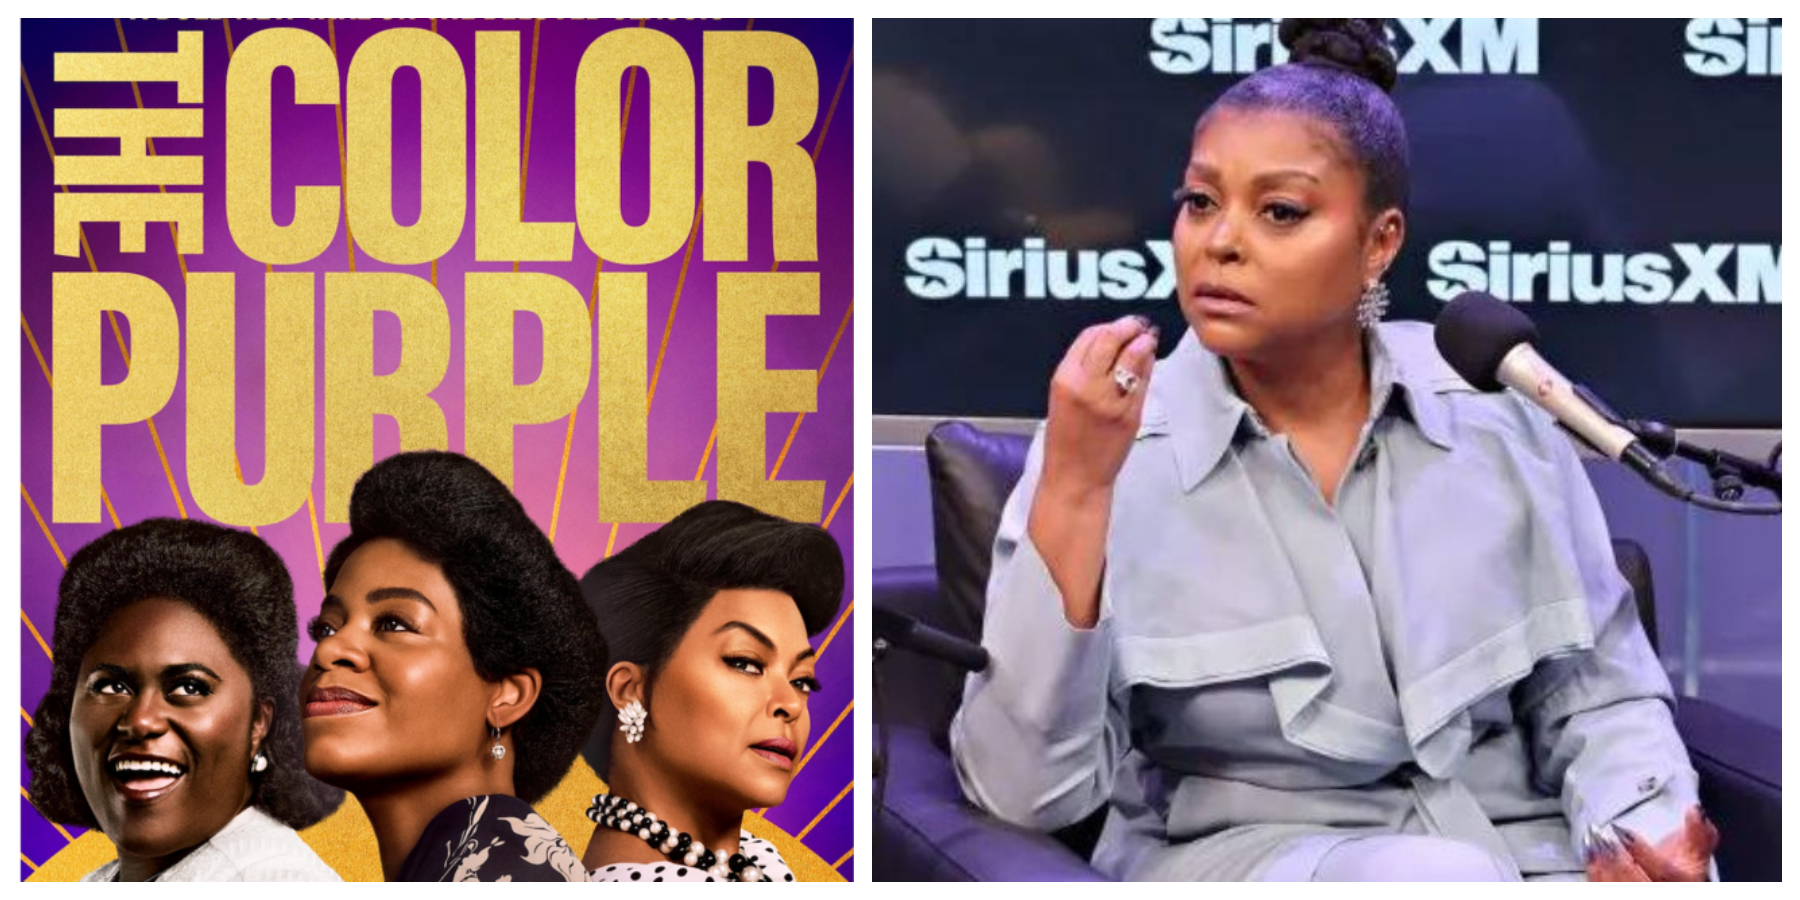 Taraji P. Henson: It’s “Not Fair” That Rumored Oprah Feud & Unfair Pay Comments Are Overshadowing ‘Color Purple’